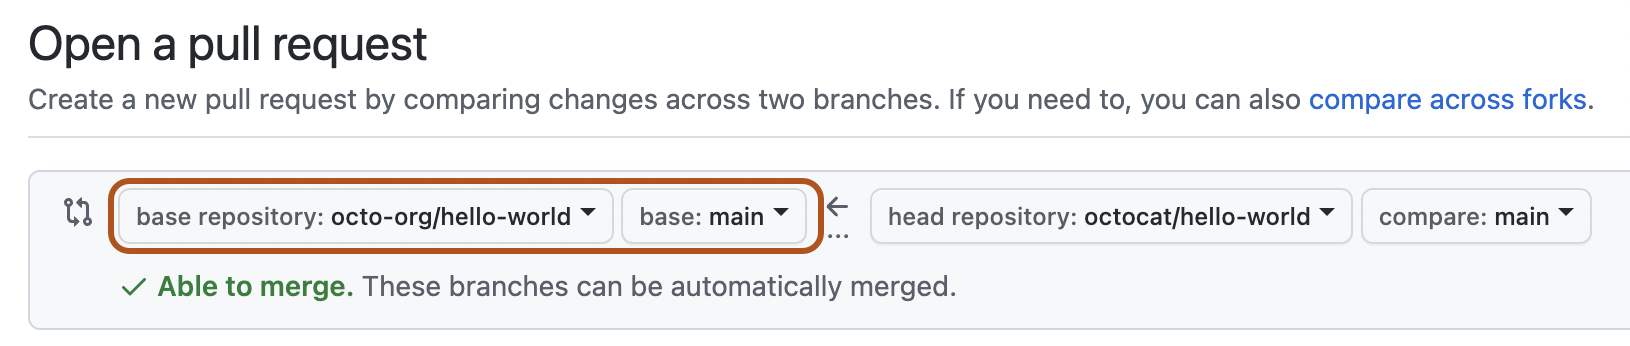 Screenshot of the page to open a new pull request. The dropdown menus for choosing the base repository and branch are outlined in dark orange.